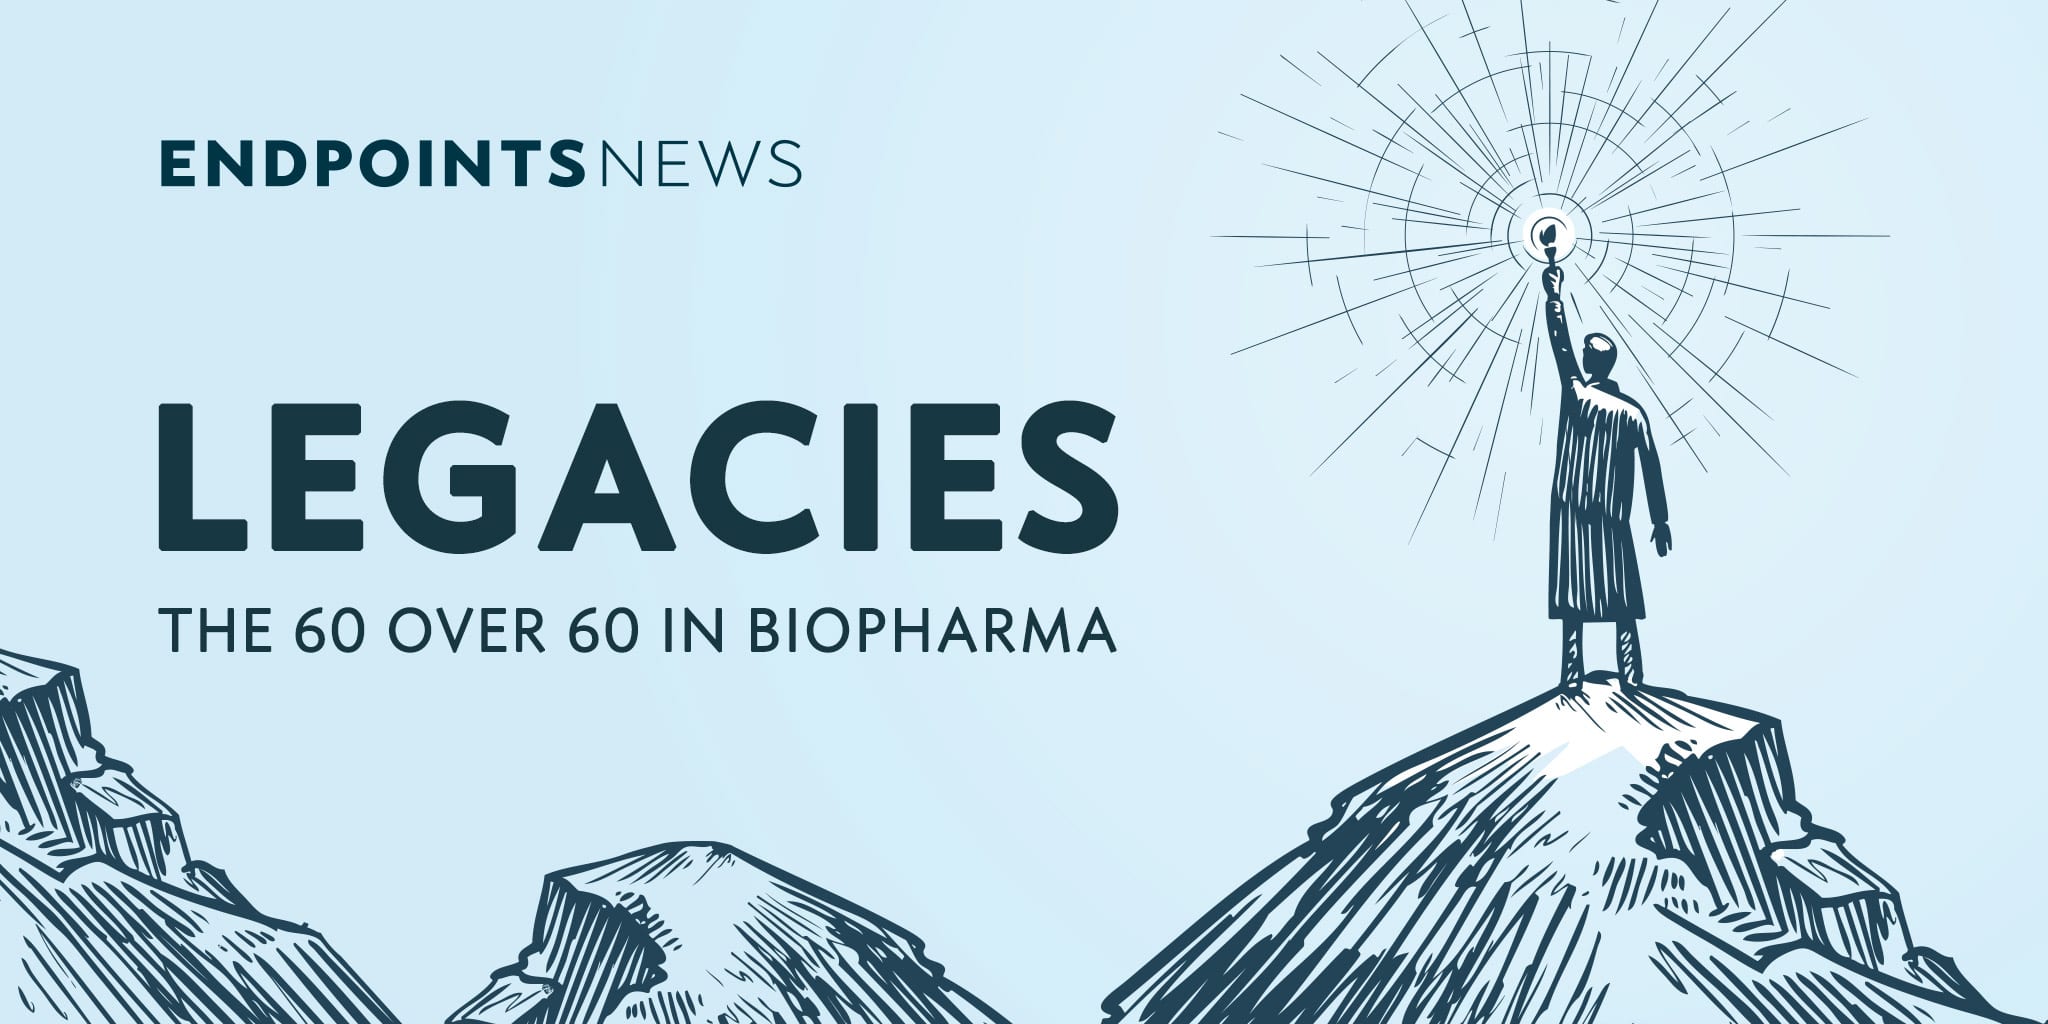 Legacies: 60 biopharma pioneers over 60 who helped birth a tech revolution in the making